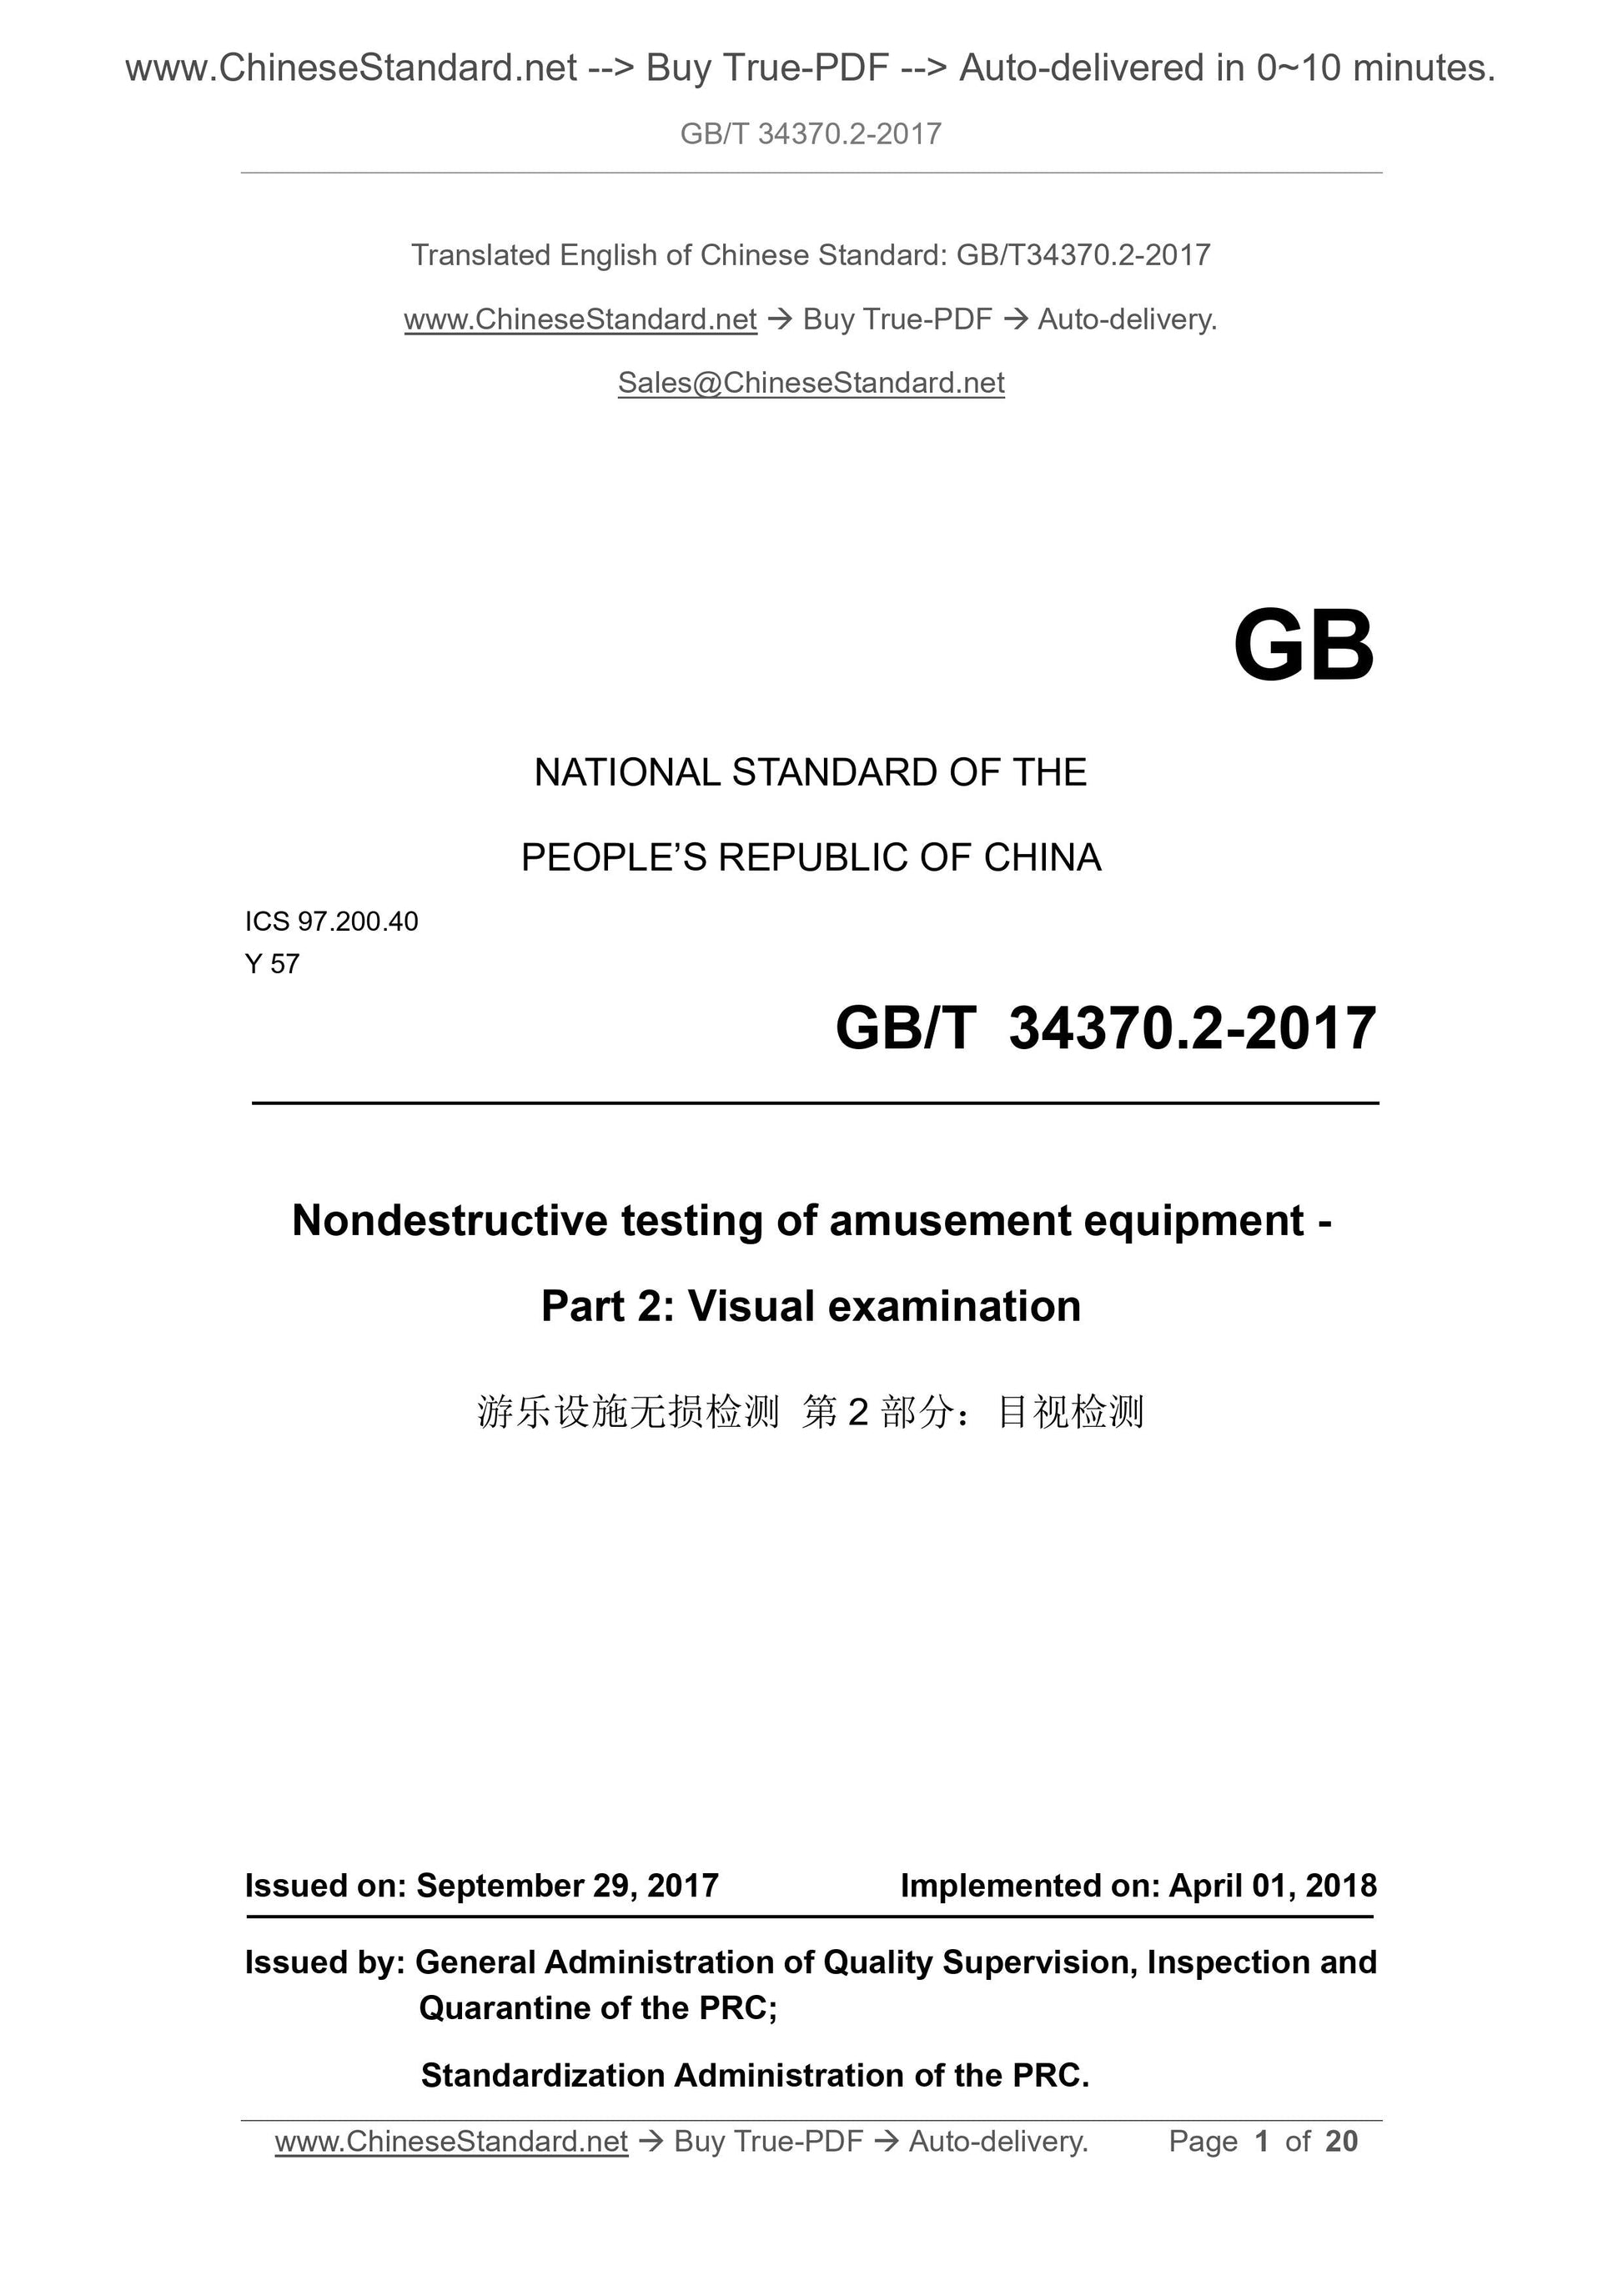 GB/T 34370.2-2017 Page 1